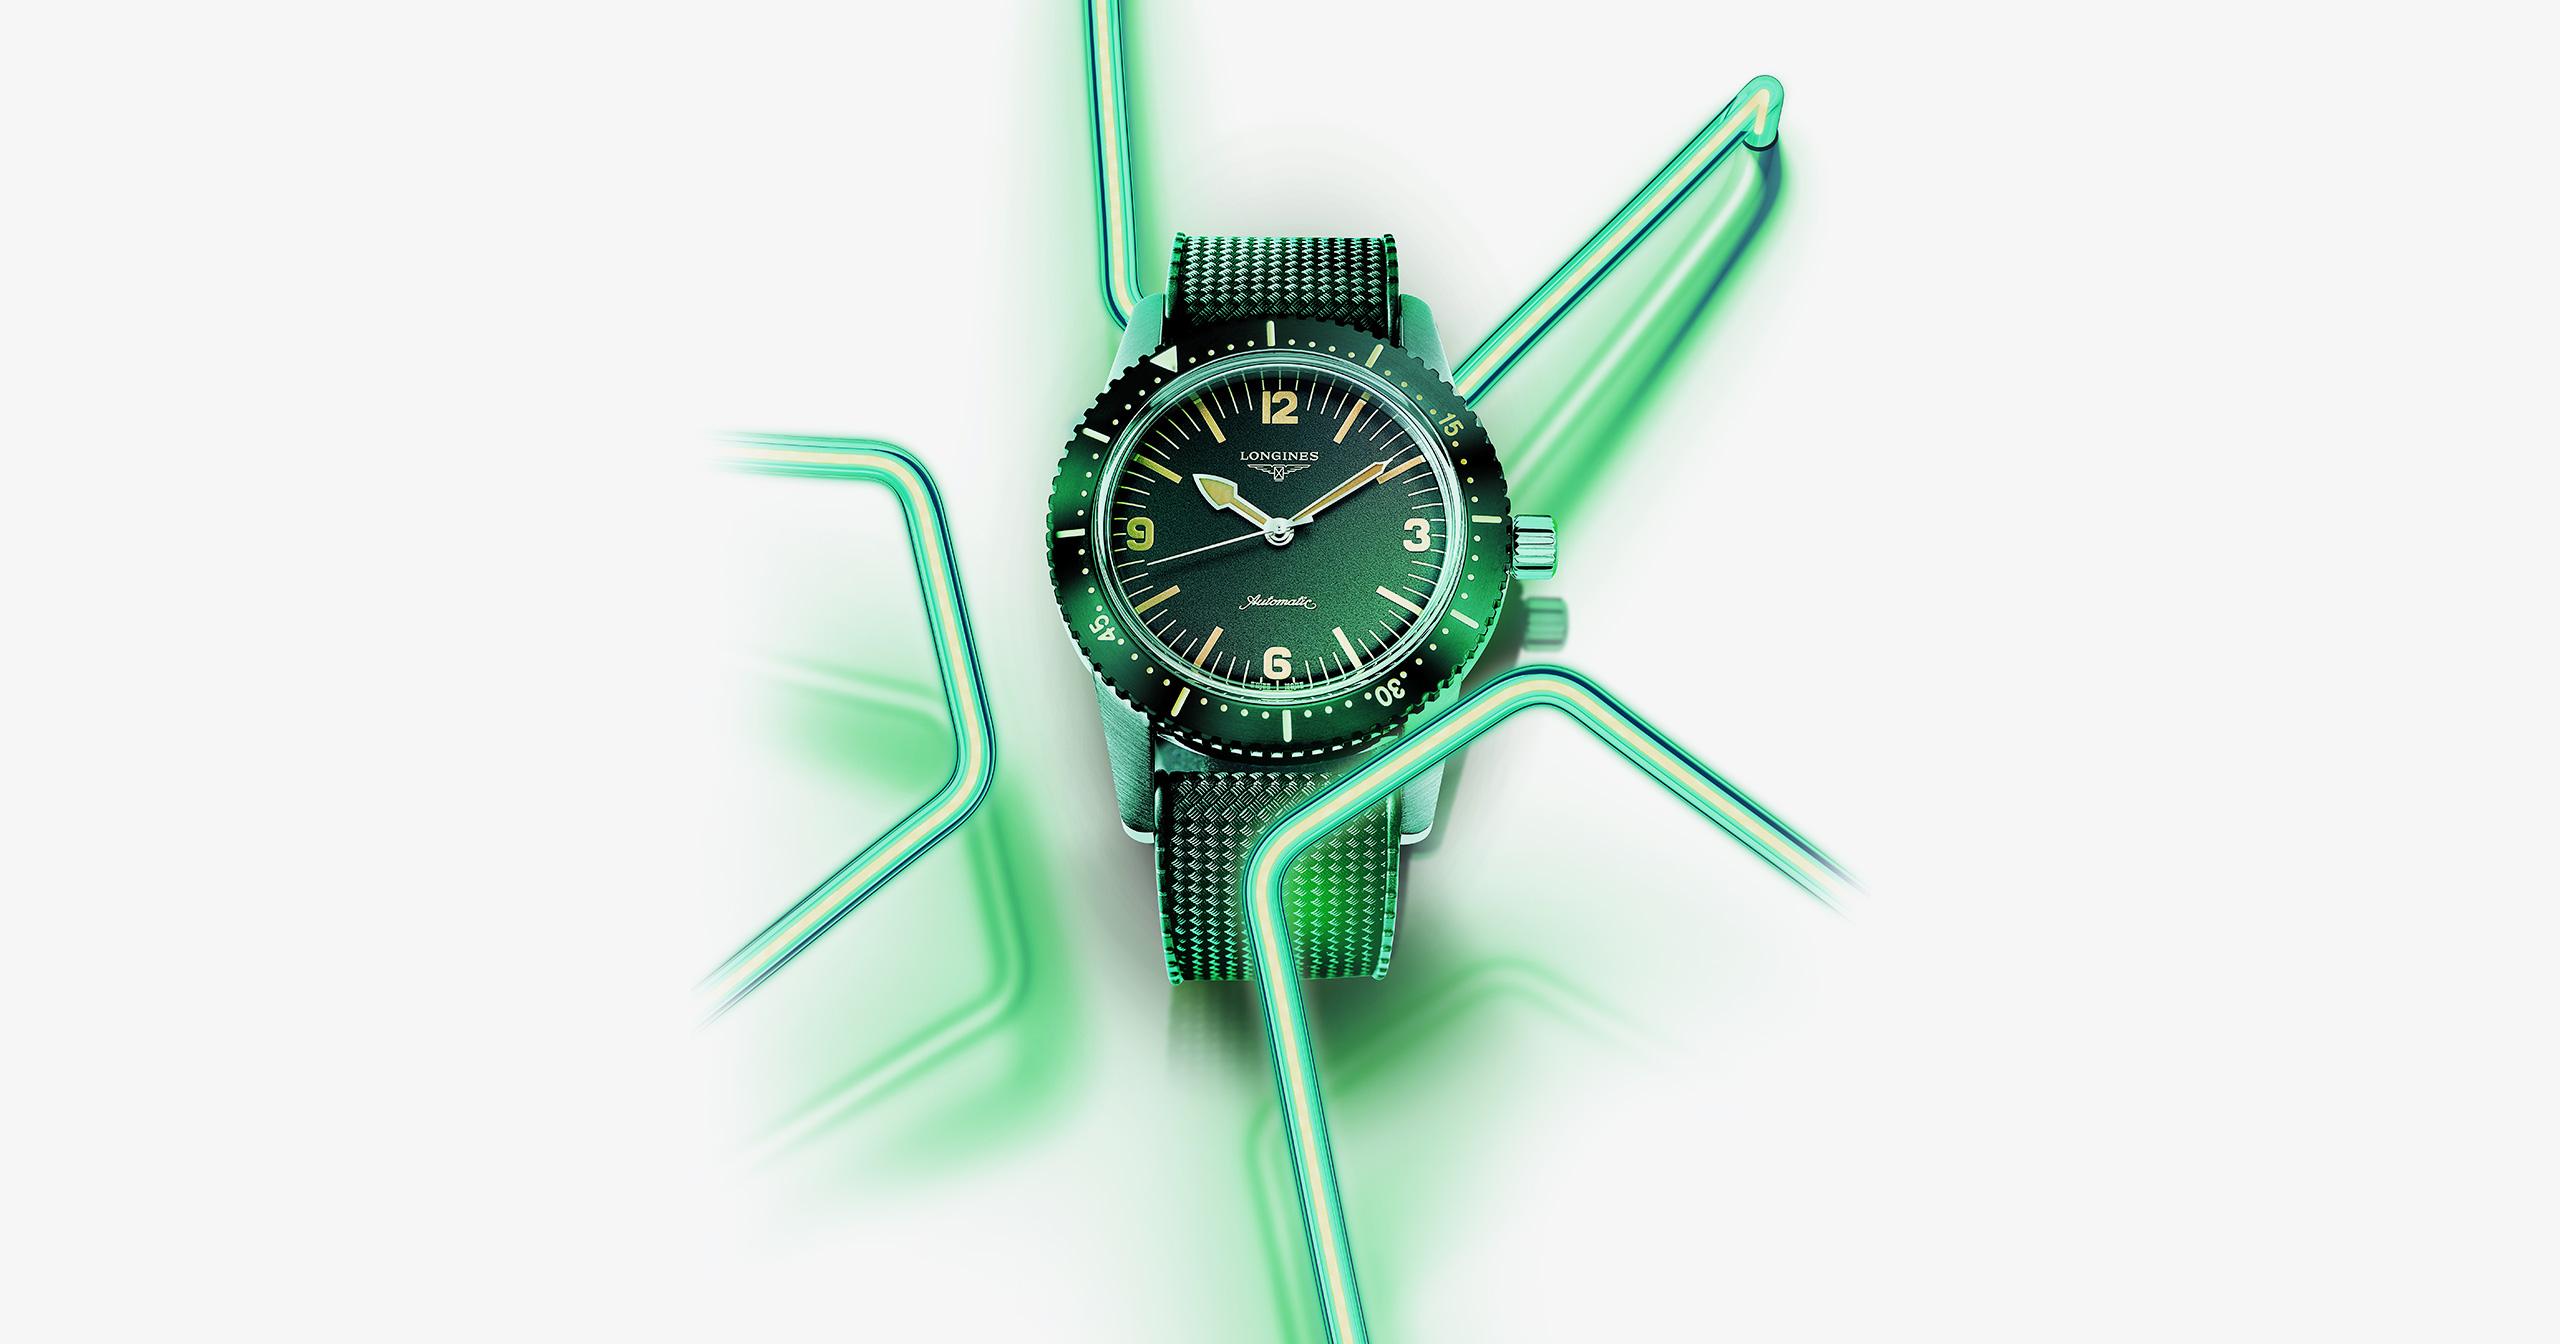 Longines Watch illuminated by neon lights, a blend of 3D/CGI and post production expertise